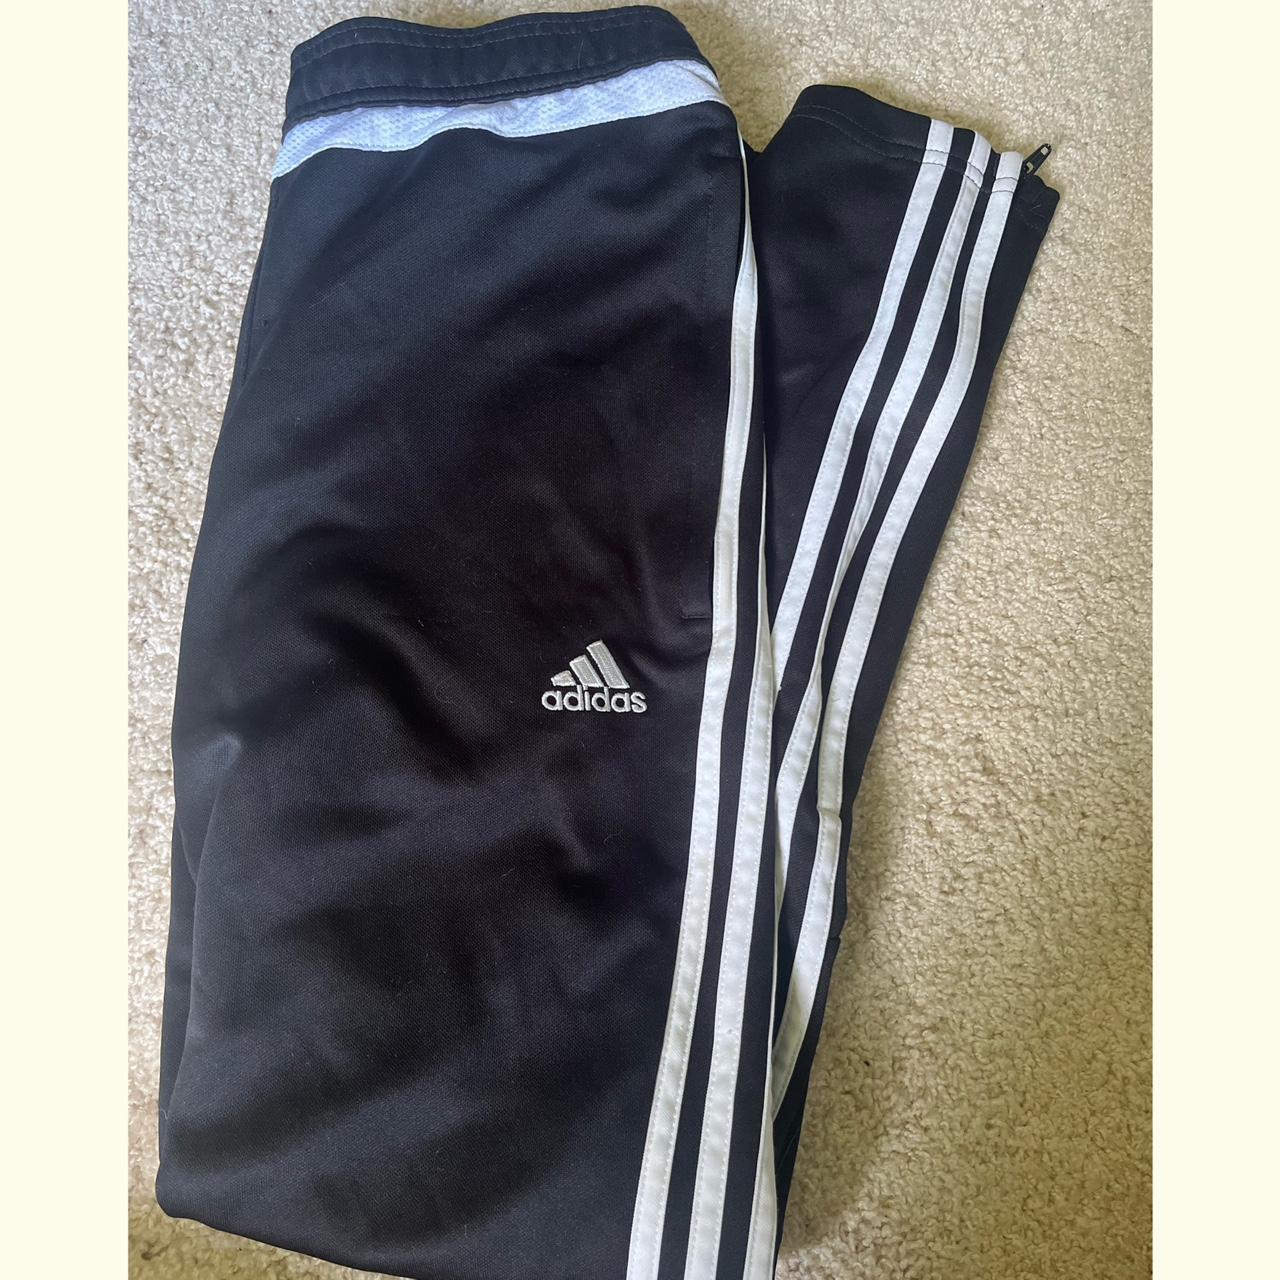 Adidas Climacool Pants Adidas, Clothes Design, Pants For, 48% OFF